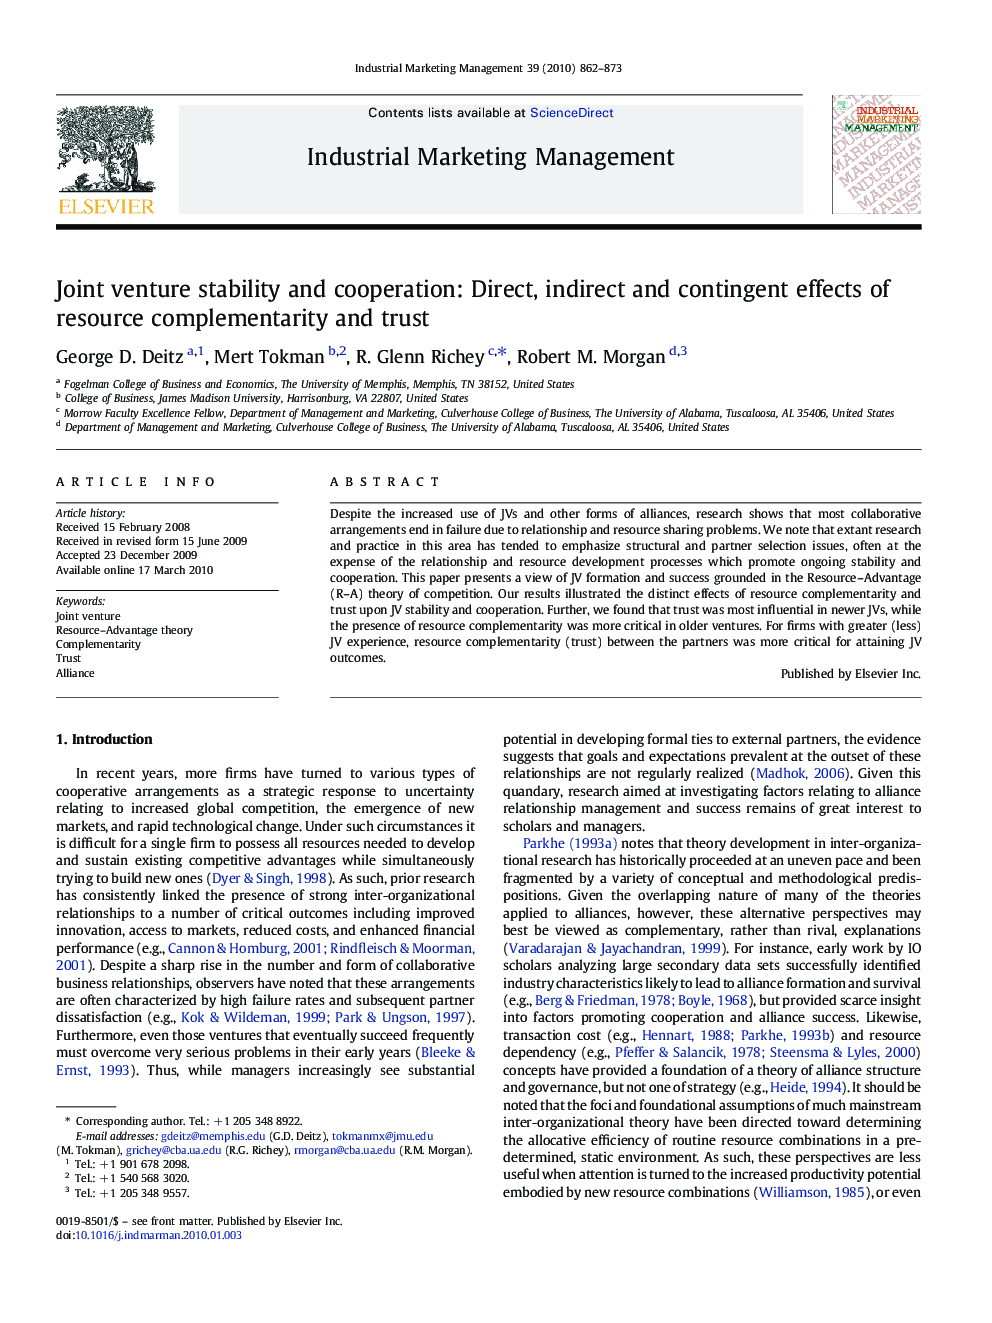 Joint venture stability and cooperation: Direct, indirect and contingent effects of resource complementarity and trust